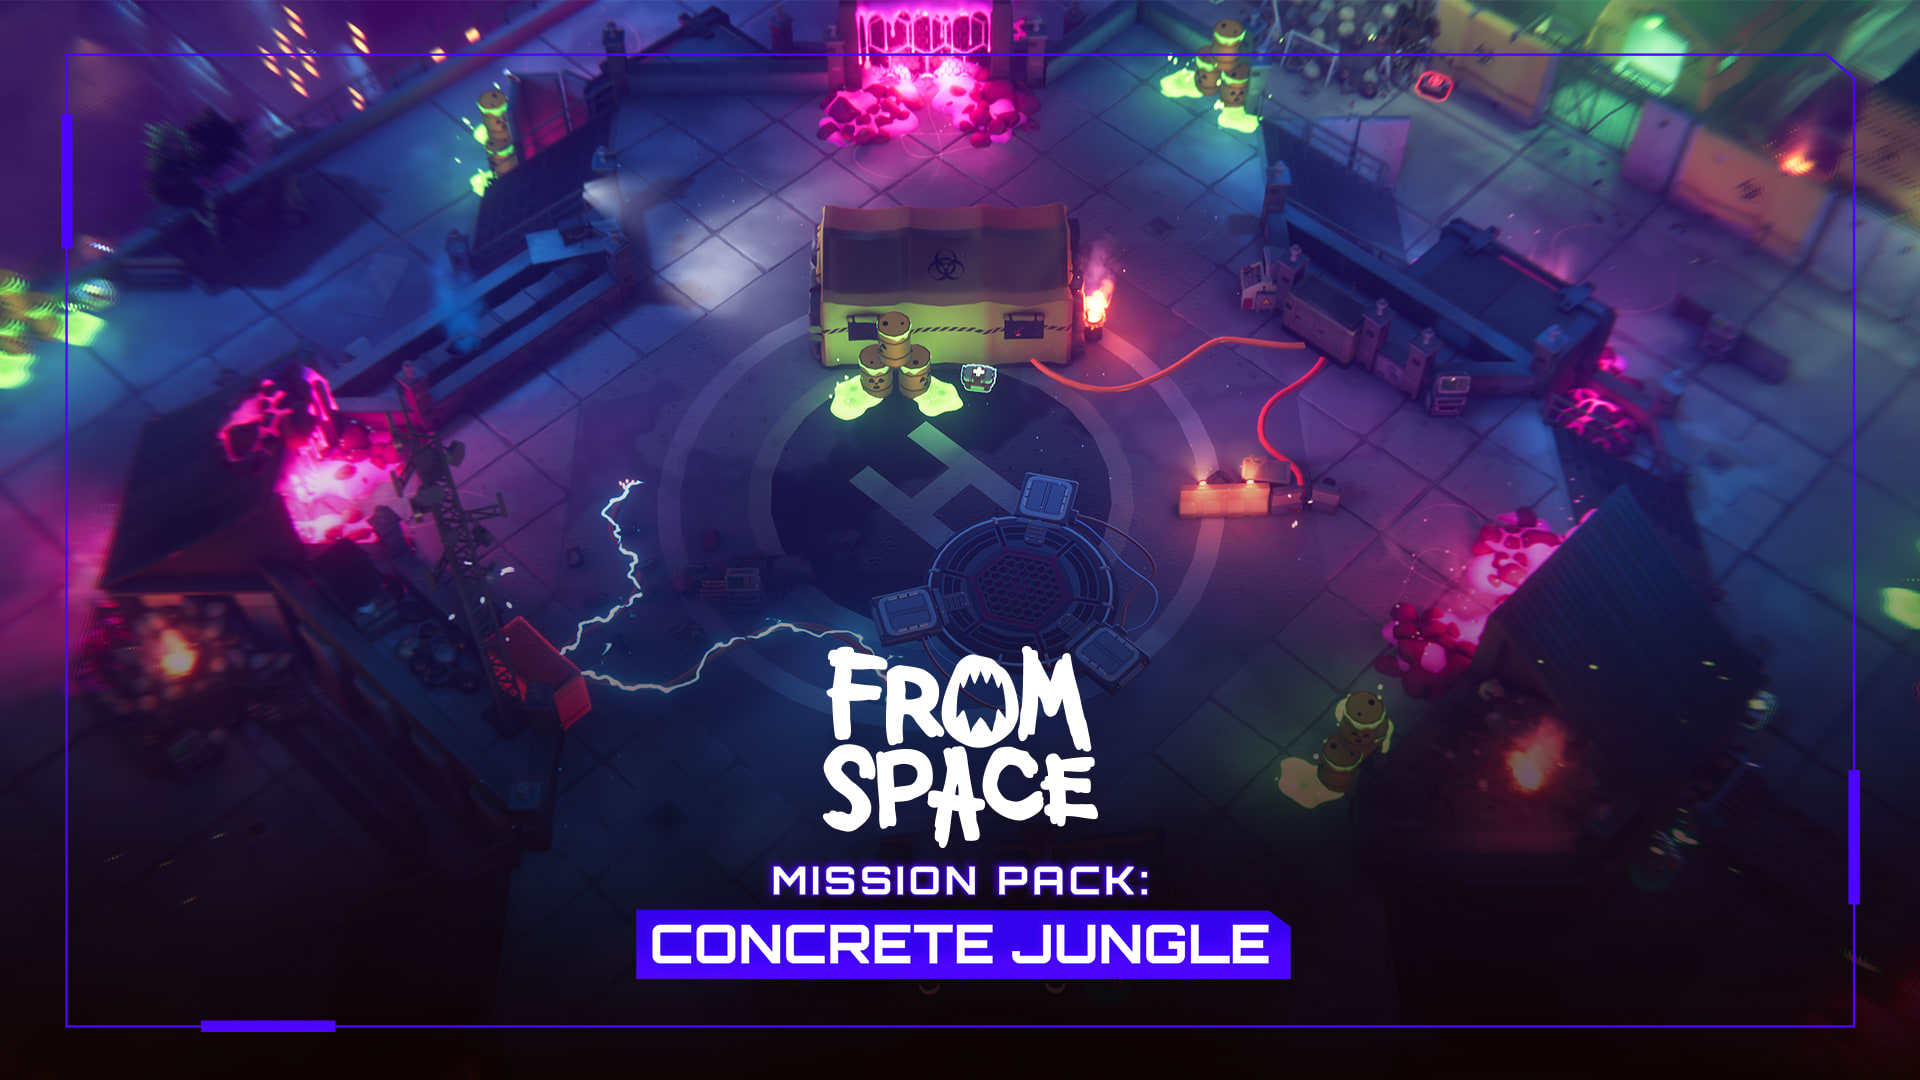 From Space Mission Pack: Concrete Jungle